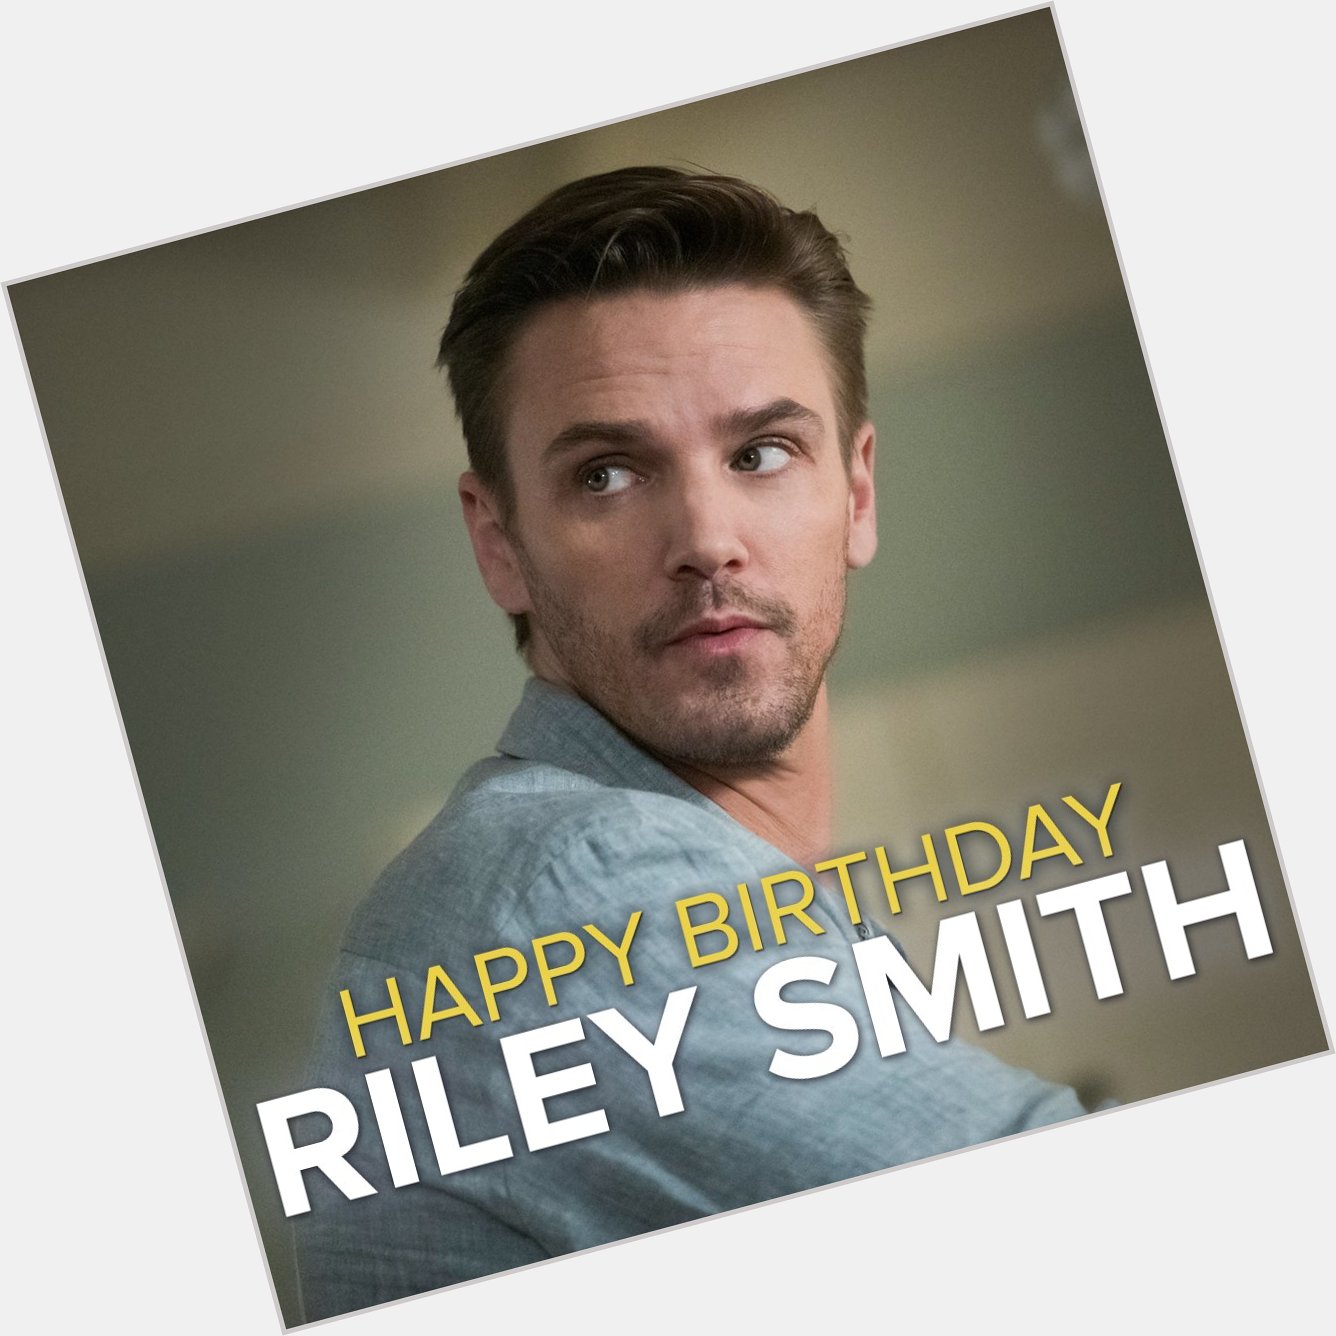 Dead Lucy won\t haunt you today! Happy Birthday, Riley Smith! 